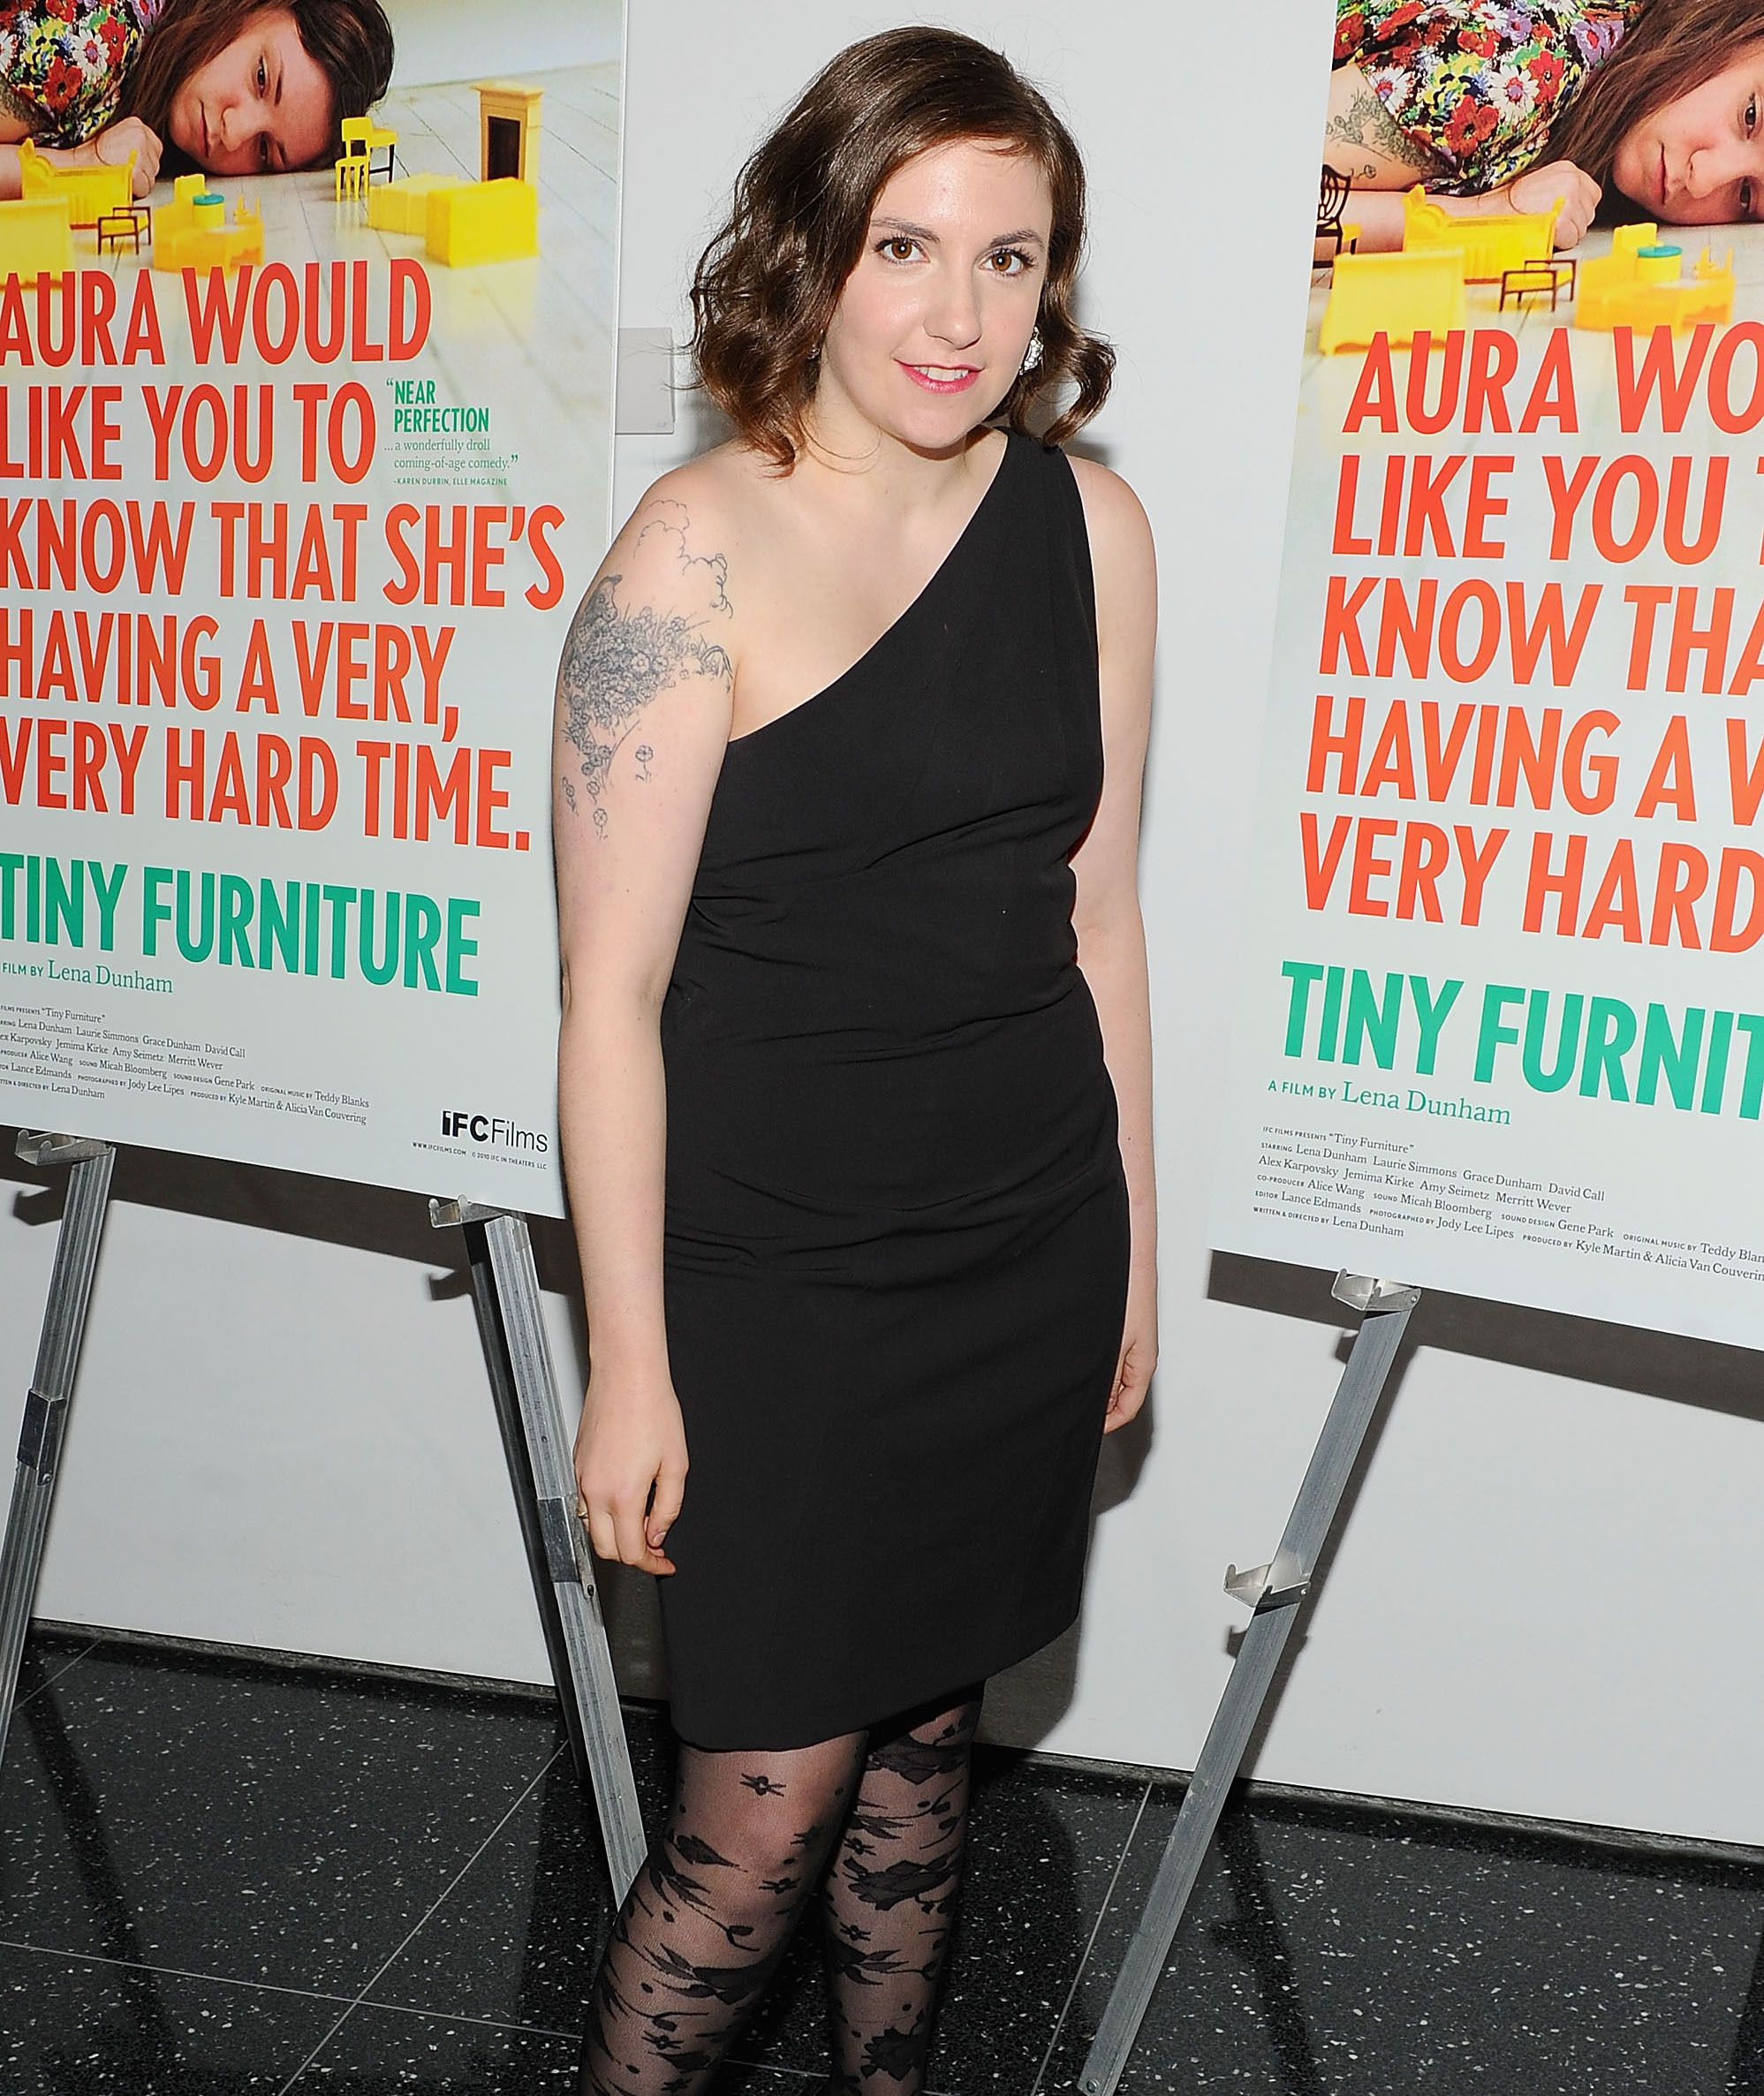 1997px x 2373px - Lena Dunham Flaunts Weight Loss in Nude Photo While Talking Body Image